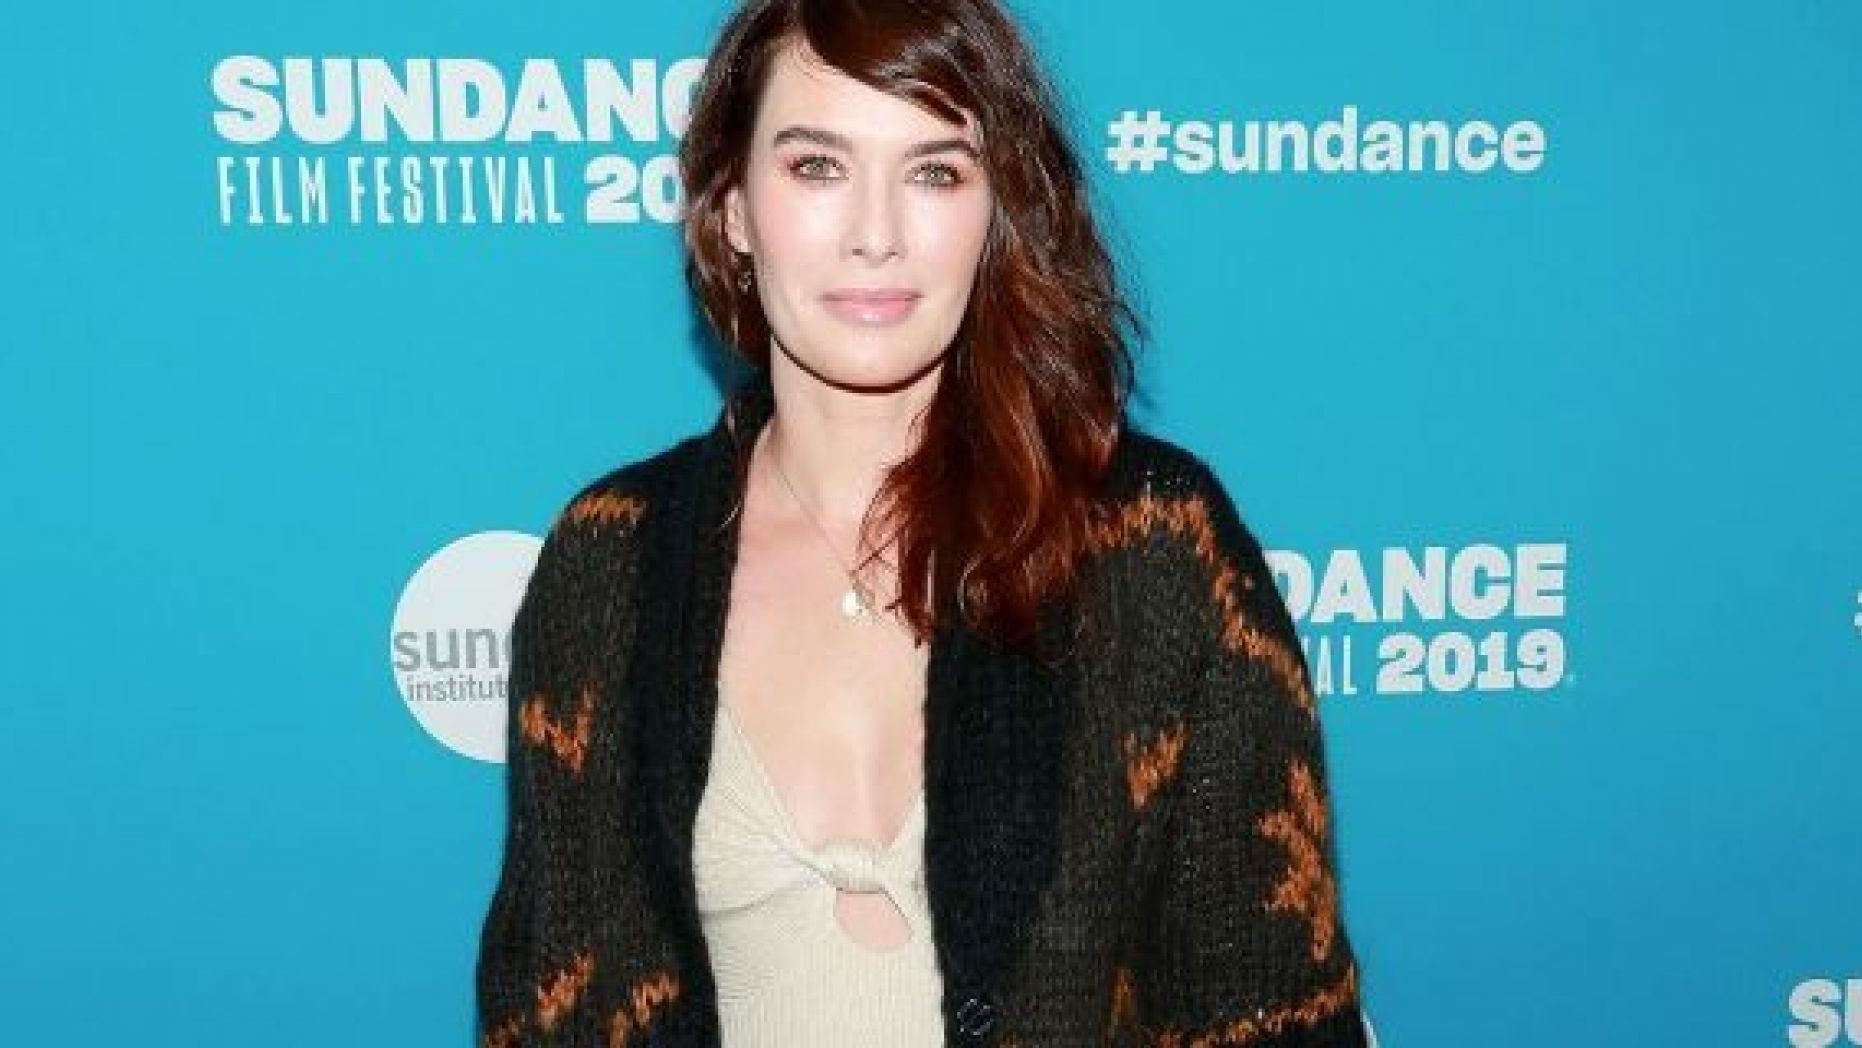 'Game of Thrones' star Lena Headey says in a new interview with the Sunday Times that rejecting Harvey Weinstein's alleged advances 'impacted a decade' of her career.